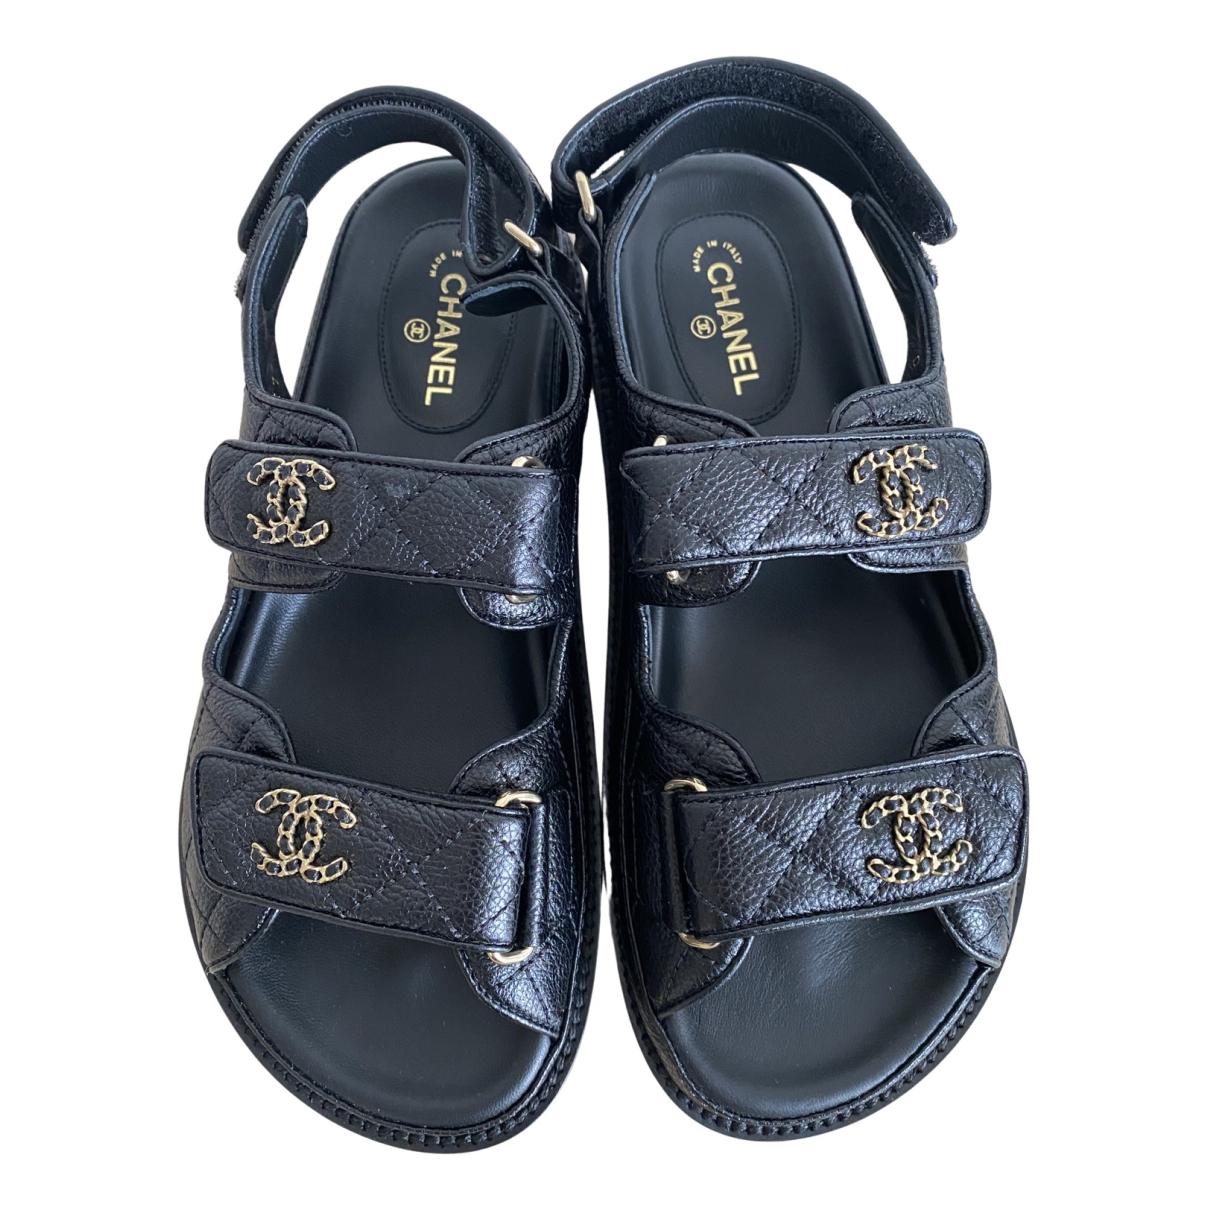 Leather sandal Chanel Black size 37 EU in Leather - 35505312